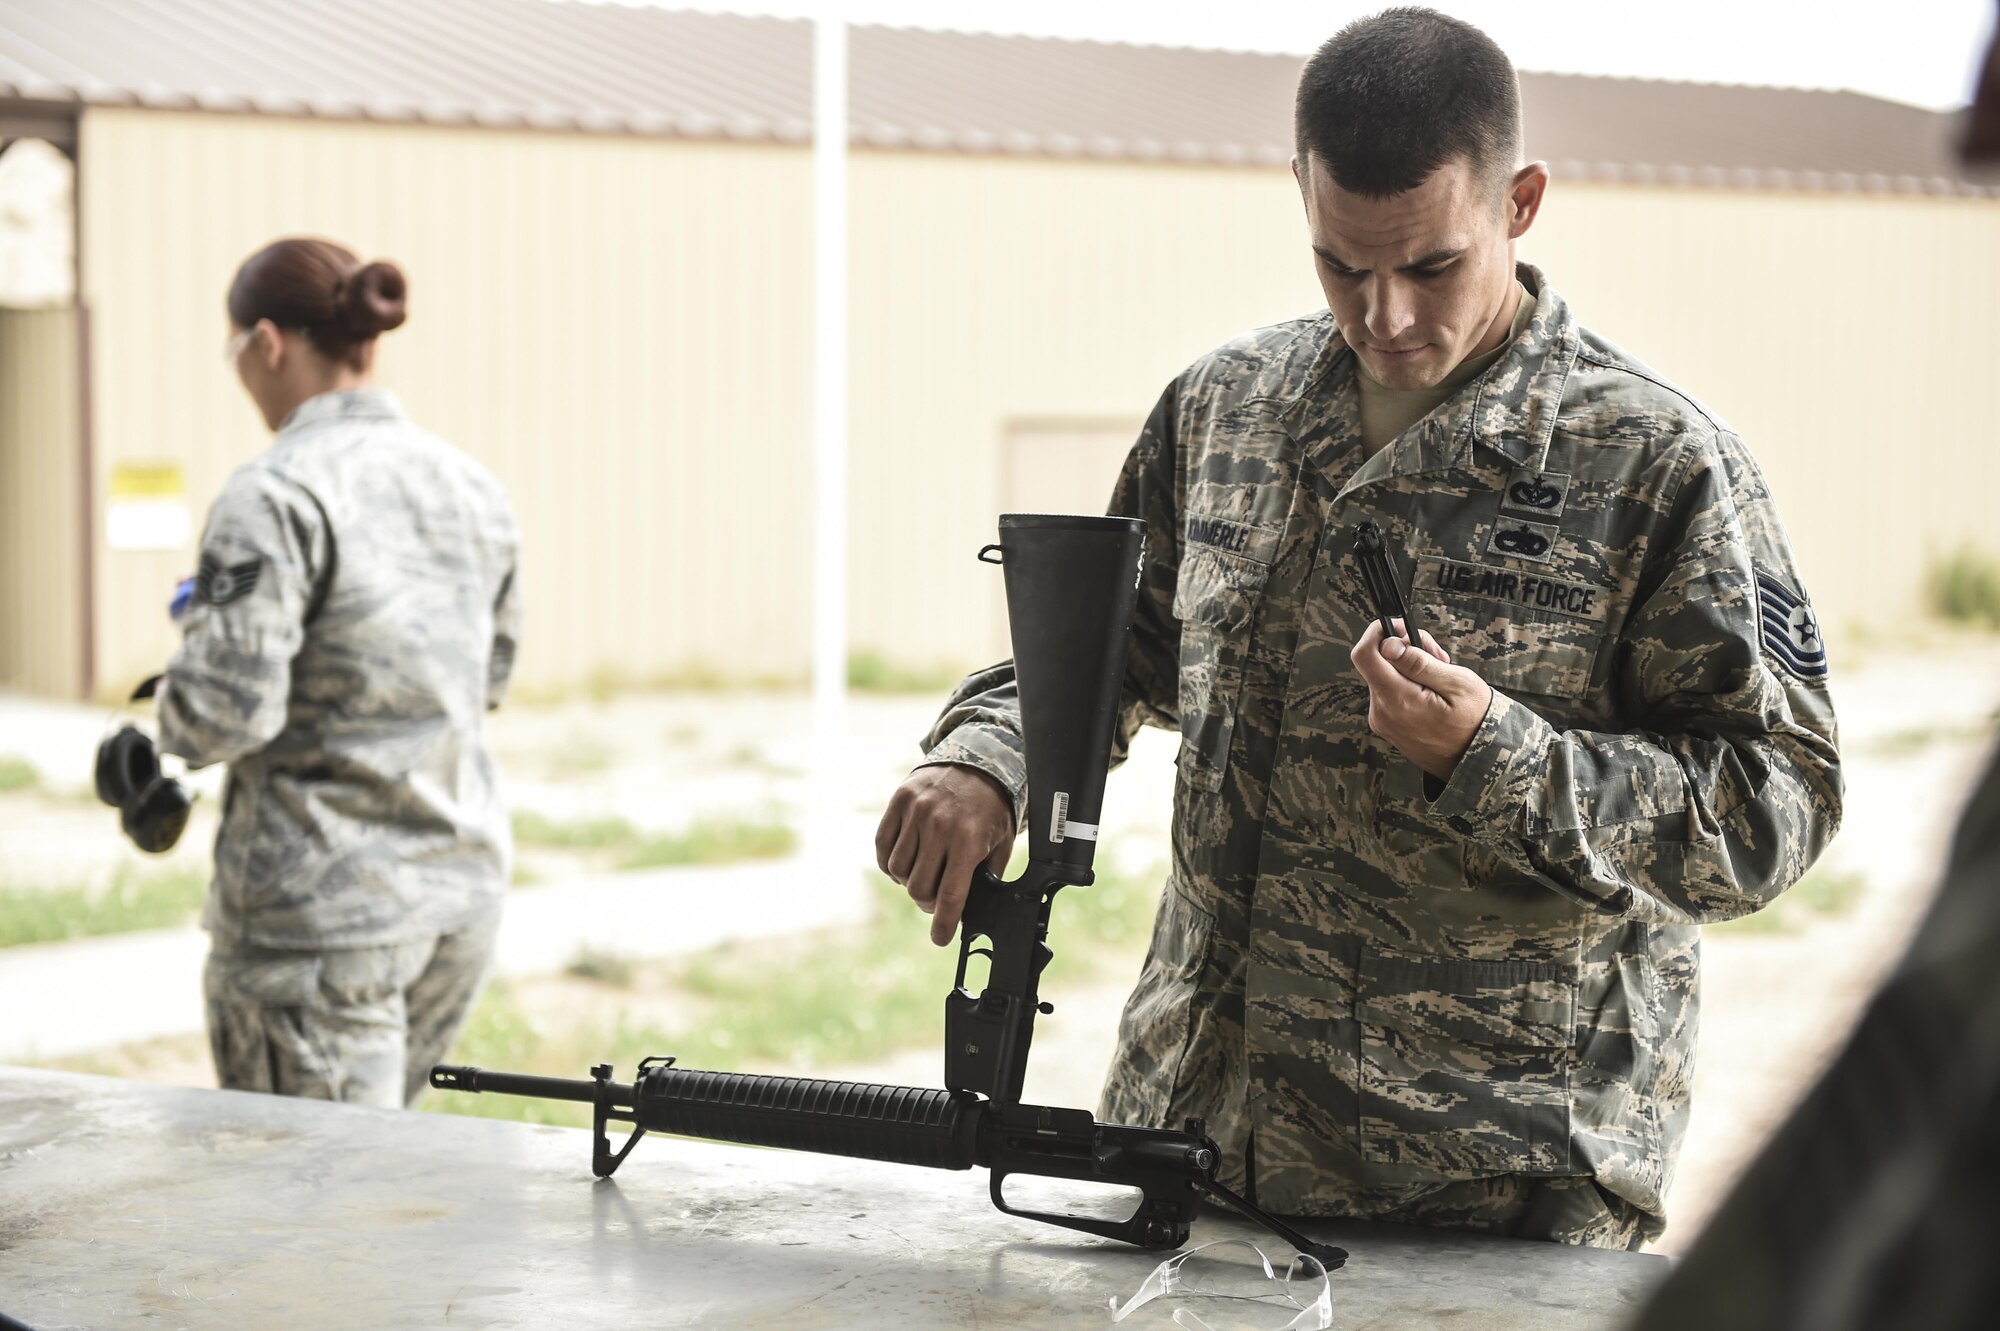 Tech. Sgt. Benjamin Kimmerle, 49th Civil Engineer Squadron checks and assembles his weapon prior to the shooting competition held during National Police Week at Holloman Air Force Base, N.M. on May 15, 2017. National Police Week was established in 1962 by President John F. Kennedy to pay tribute to law enforcement officers who lost their lives in the line of duty for the safety and protection of others, according to the National Peace Officer's Memorial Fund website. Ceremonies are held annually in Washington D.C., as well as in communities across the nation. (U.S. Air Force photo by Staff Sgt. Stacy Jonsgaard)    